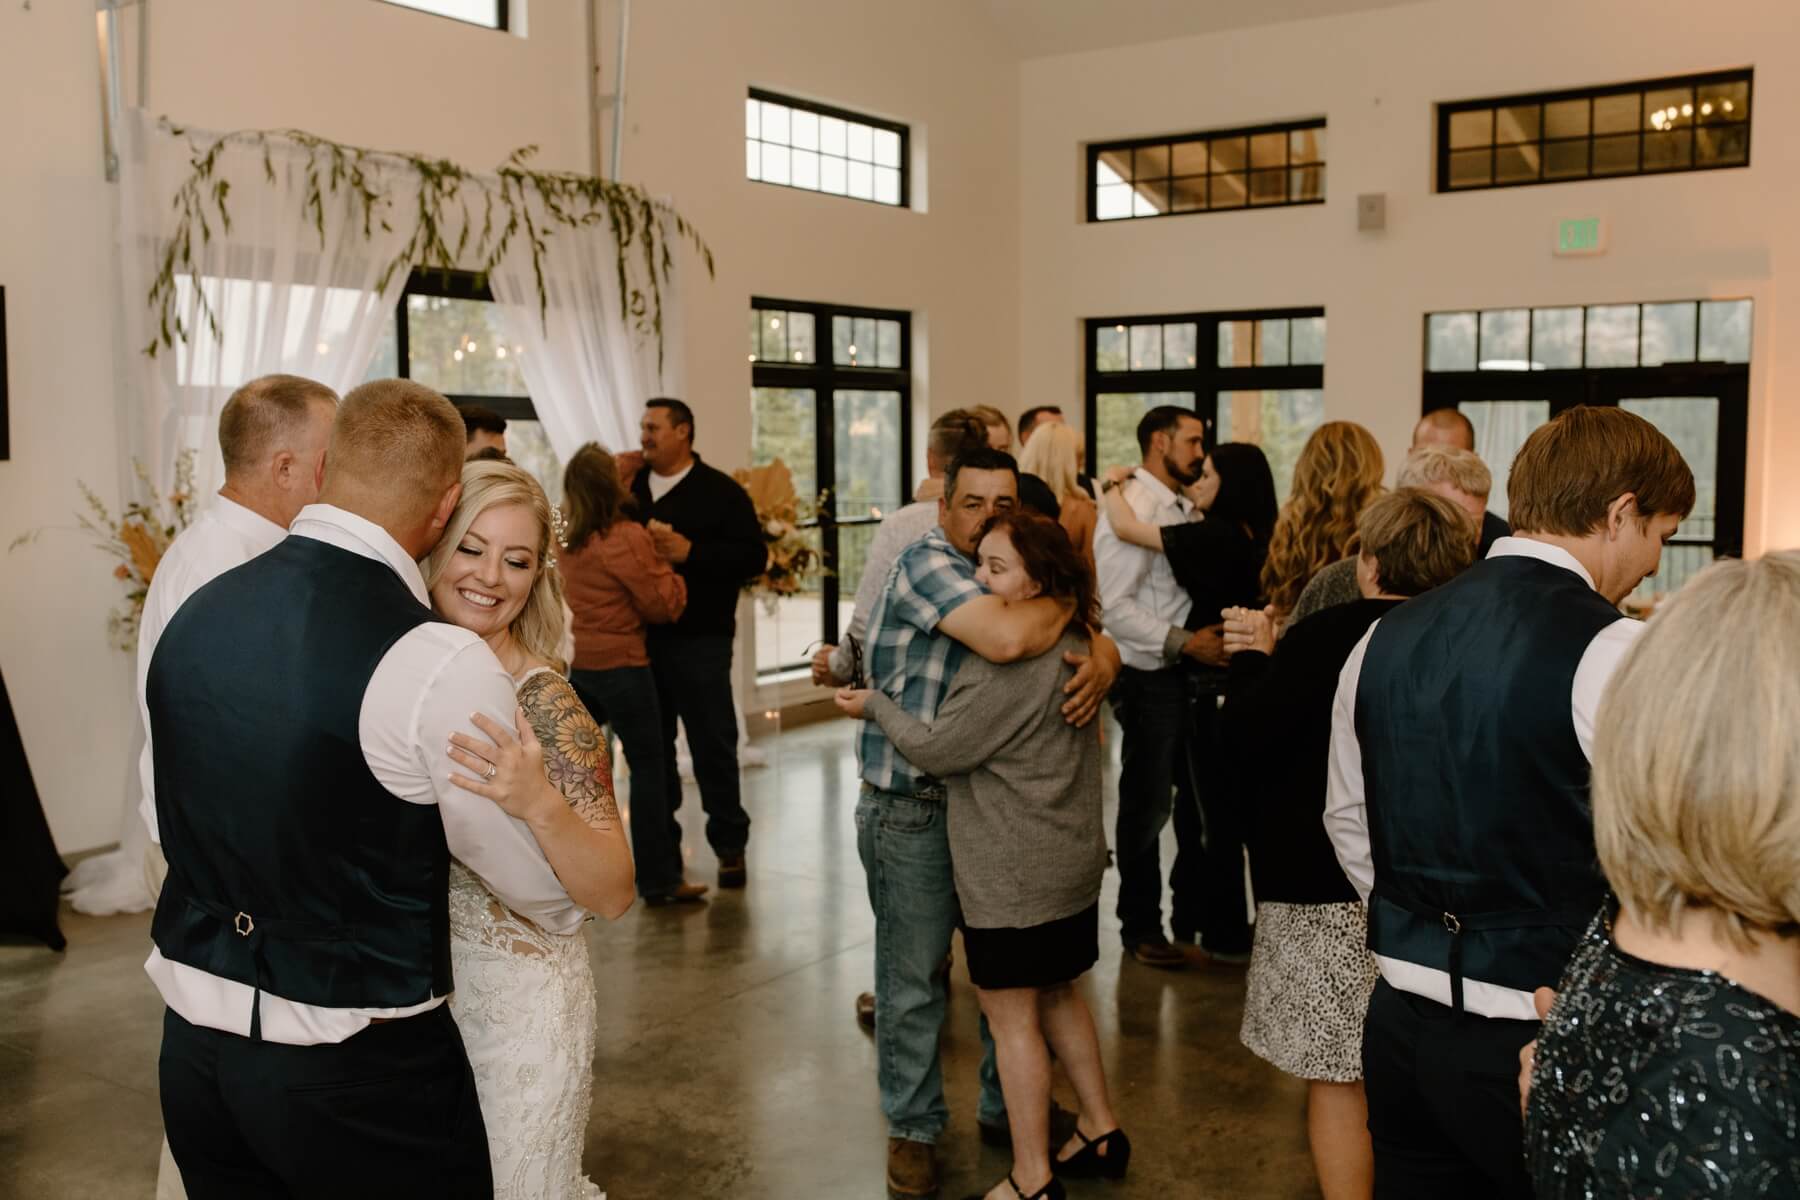 Bride and groom dancing with wedding guests at Idaho Springs wedding venue | McArthur Weddings and Events